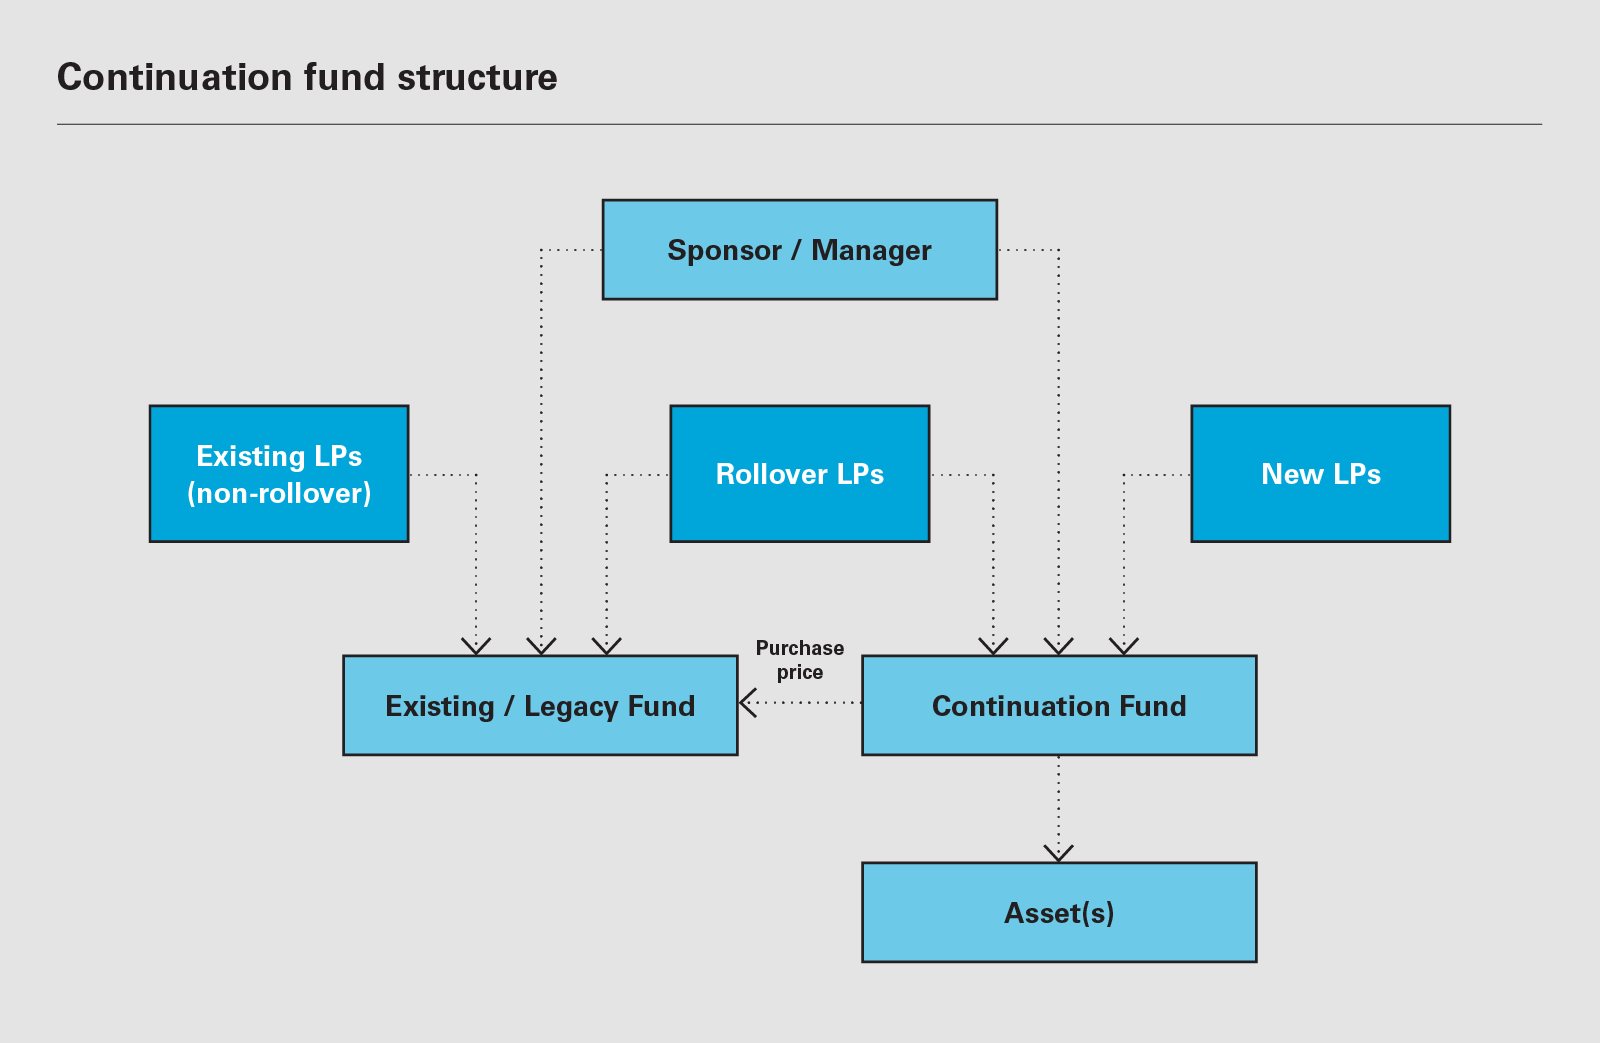 Continuation fund structure